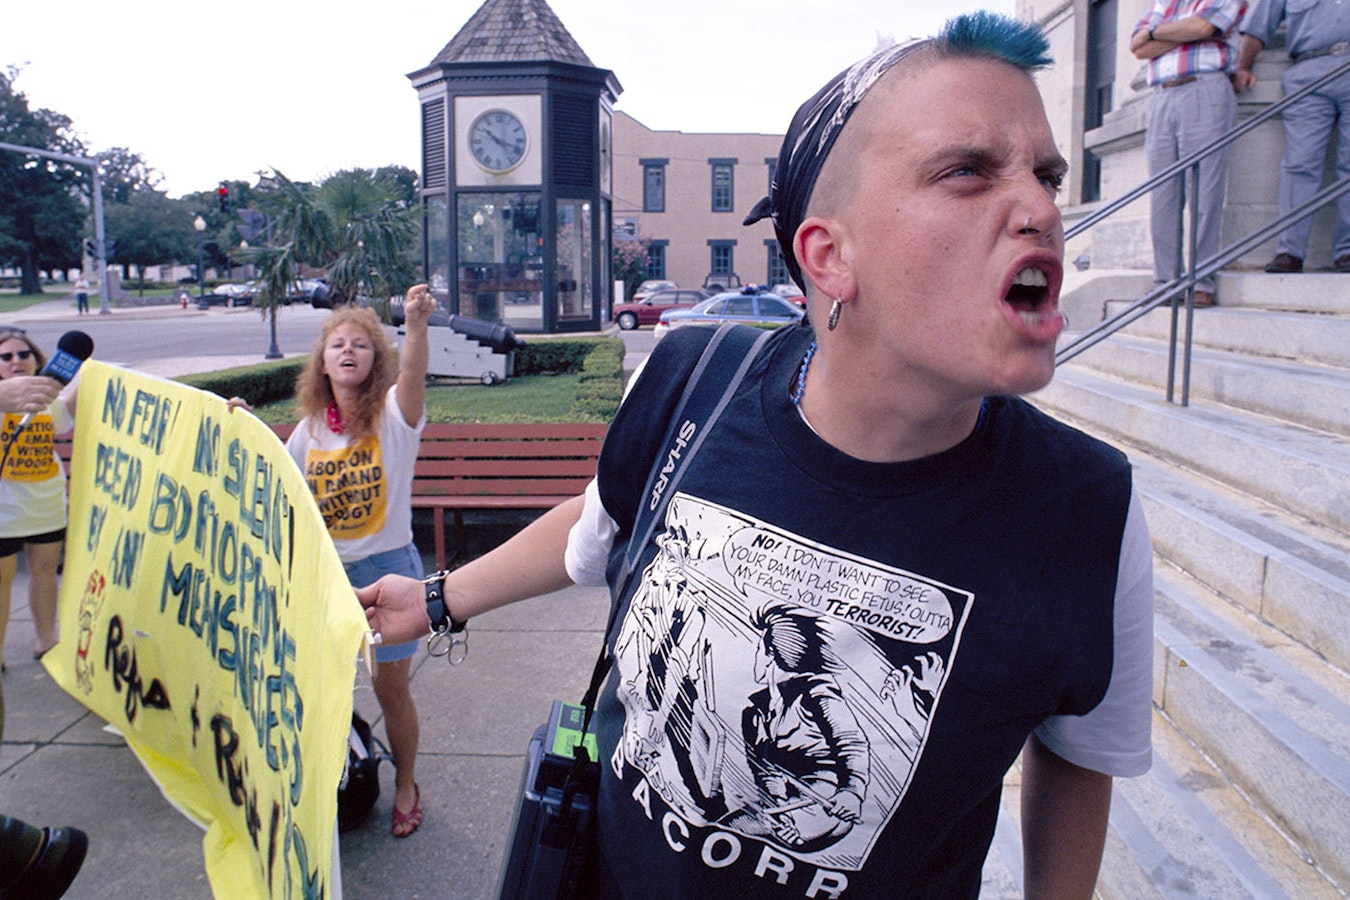 An angry and agitated abortion rights protester.